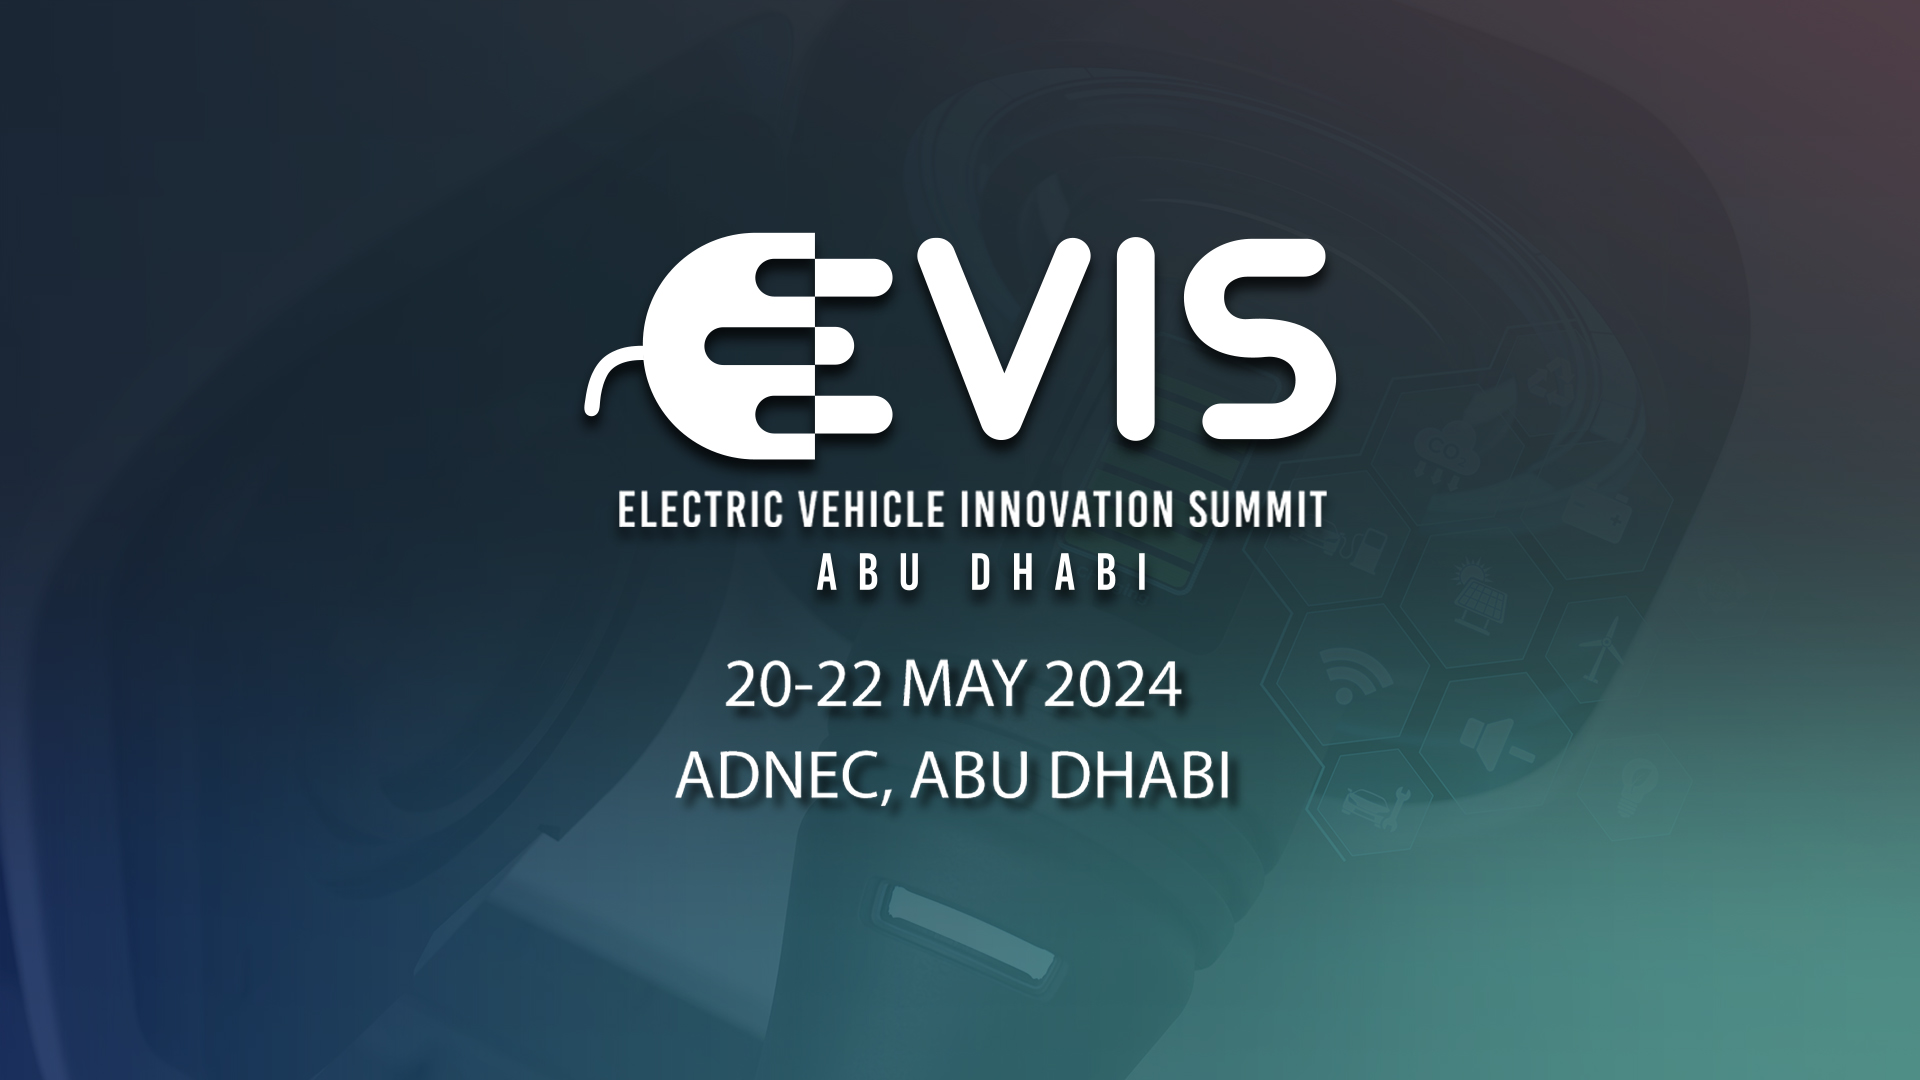 EVIS 2024 — MENA’s Largest EV Expo Is Back In Abu Dhabi In May 2024